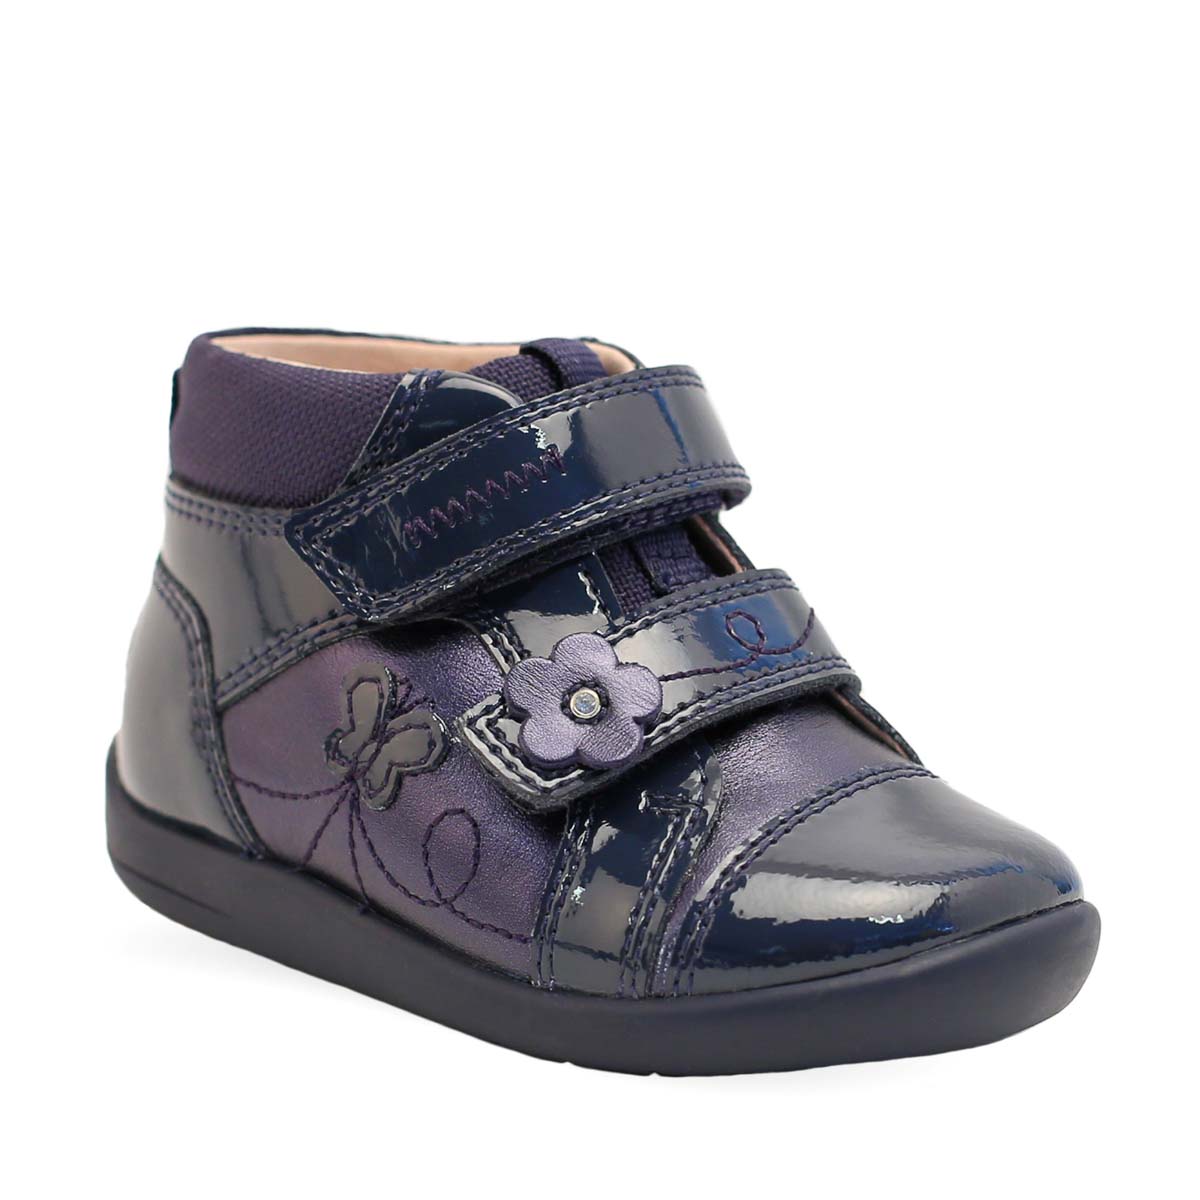 Start Rite - Daydream 2V In Navy Patent 0792-96F In Size 7 In Plain Navy Patent Infant Girls Boots  In Navy Patent For kids